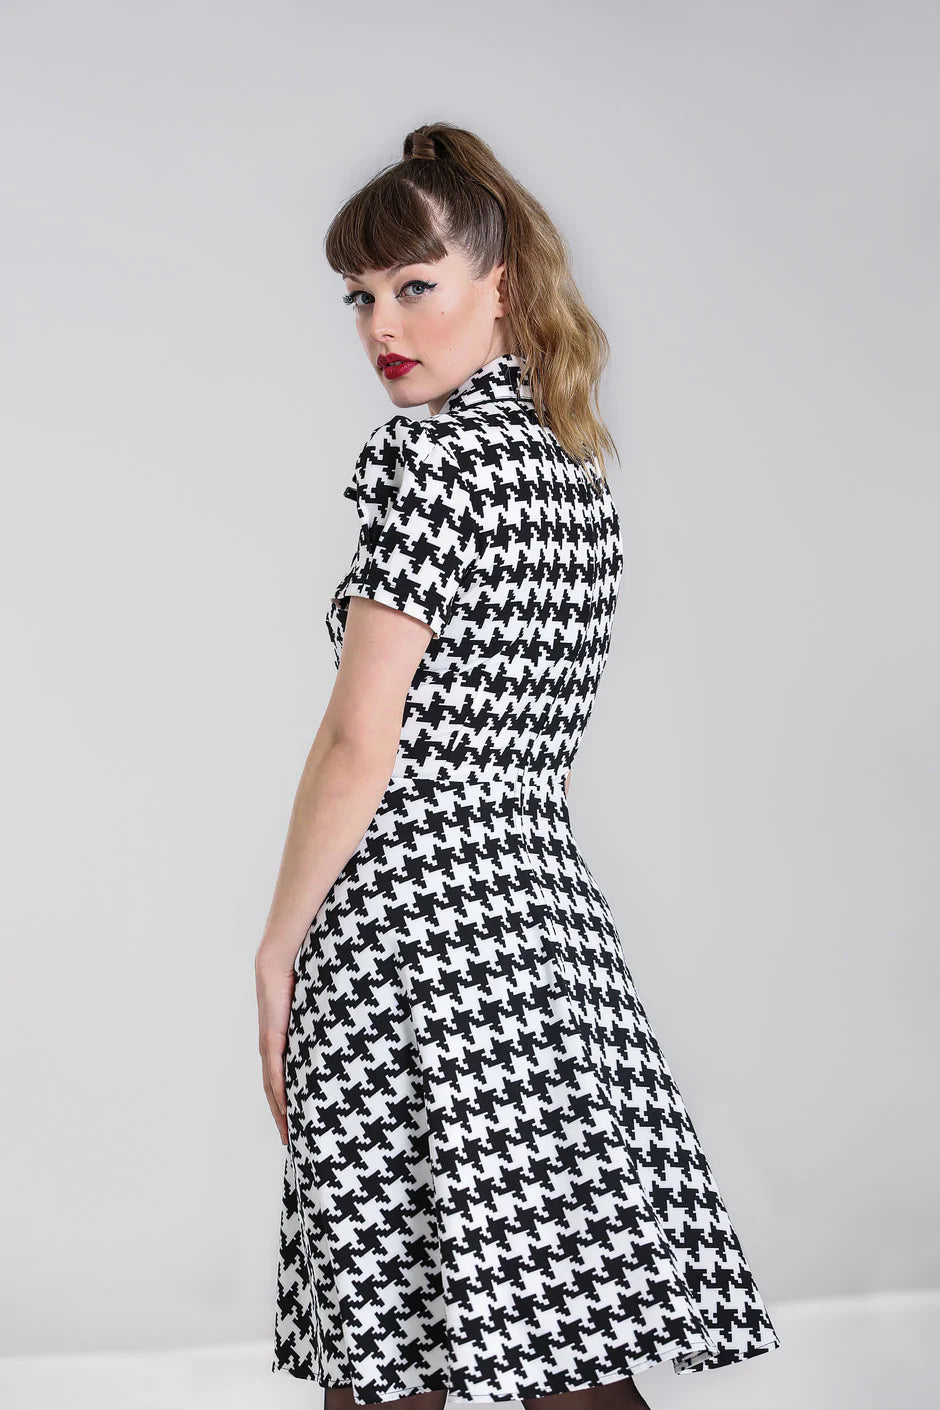 Blake Houndstooth Mid Dress by Hell Bunny